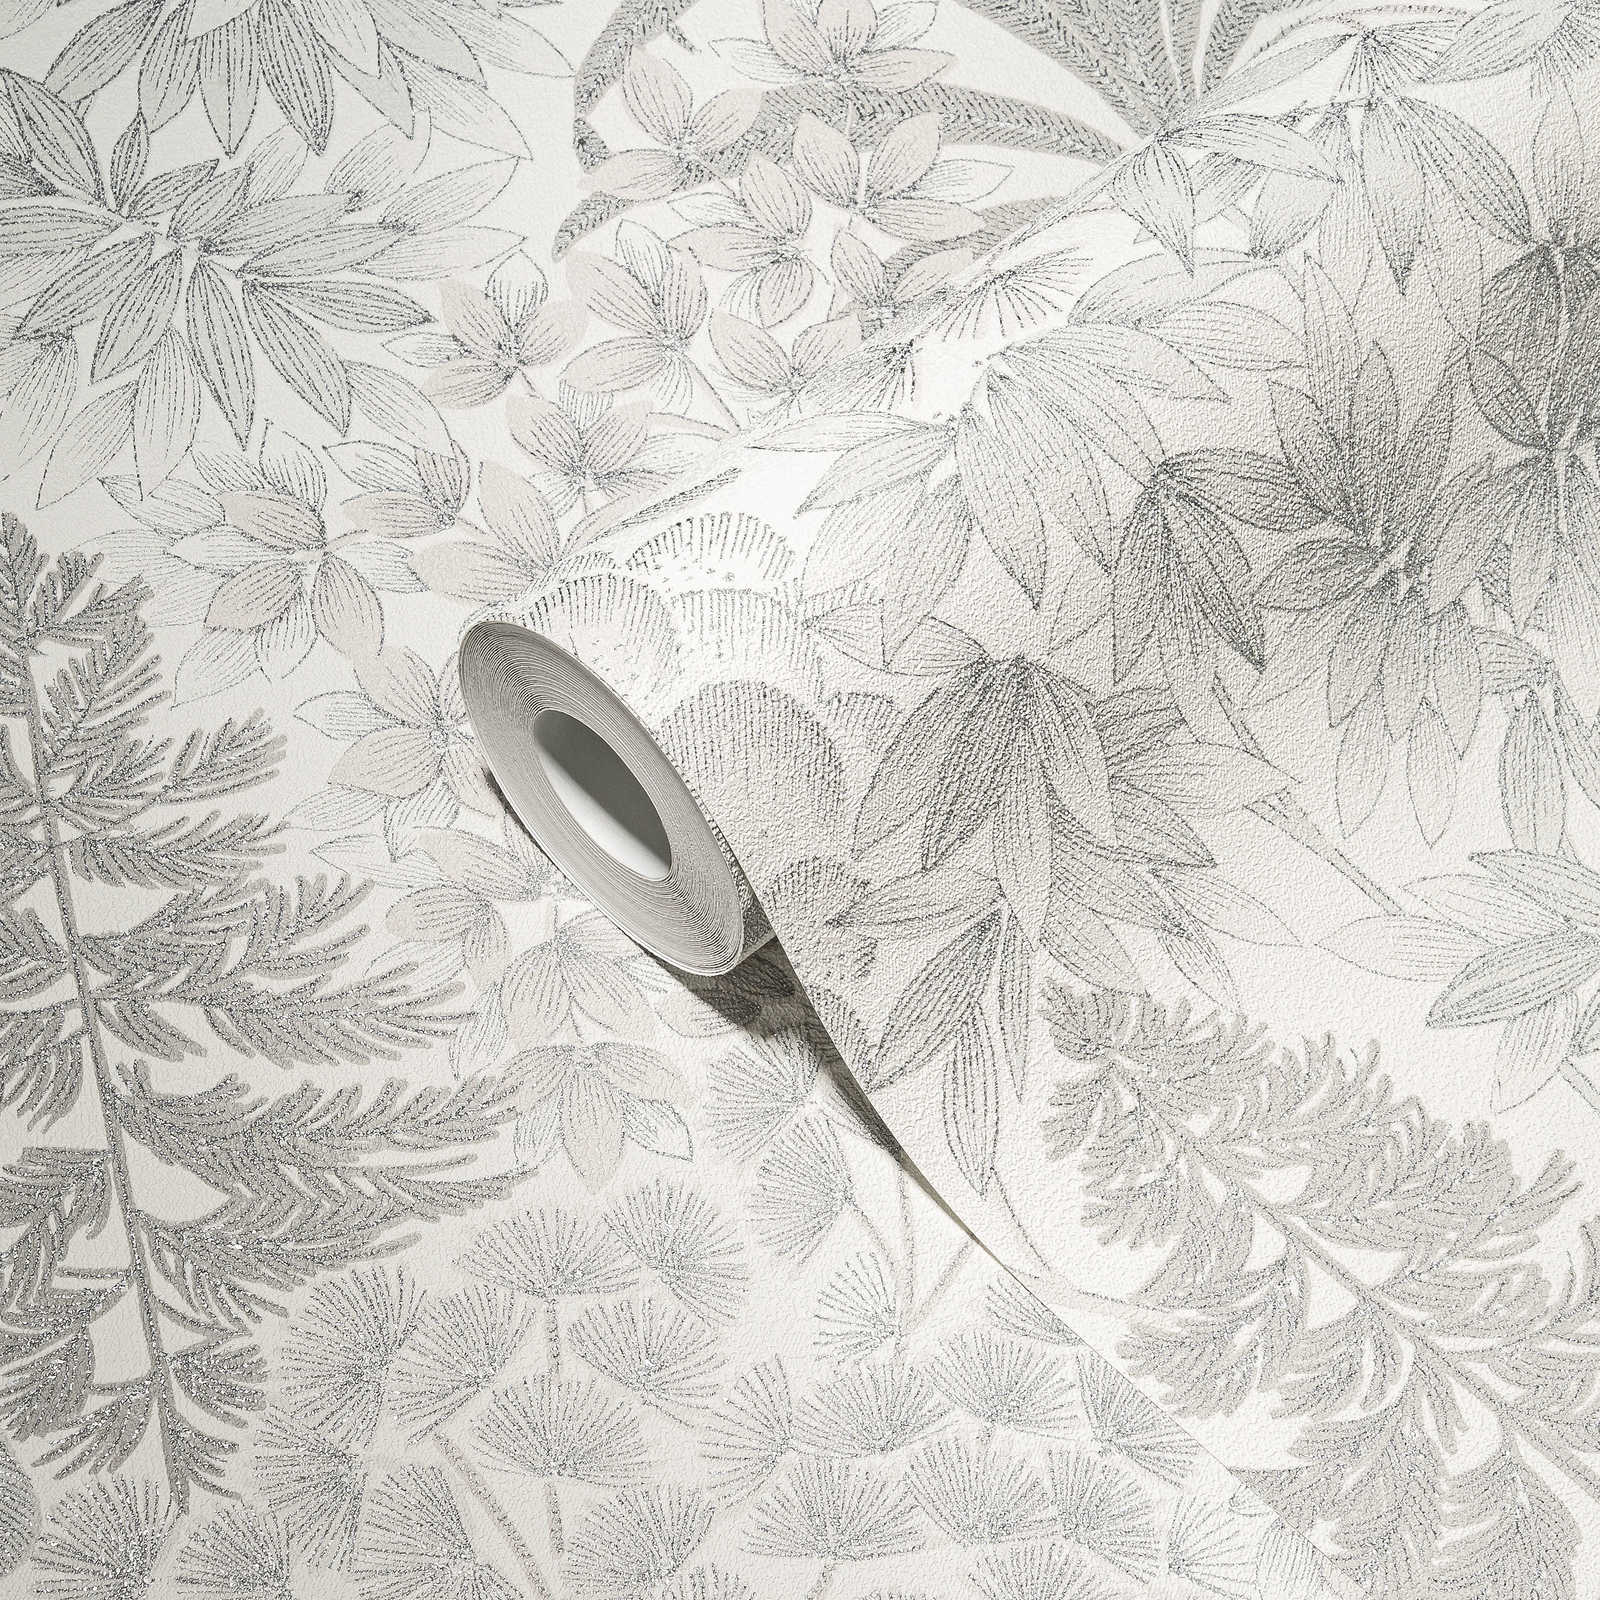             Slightly shiny floral wallpaper in a subtle colour - white, grey, silver
        